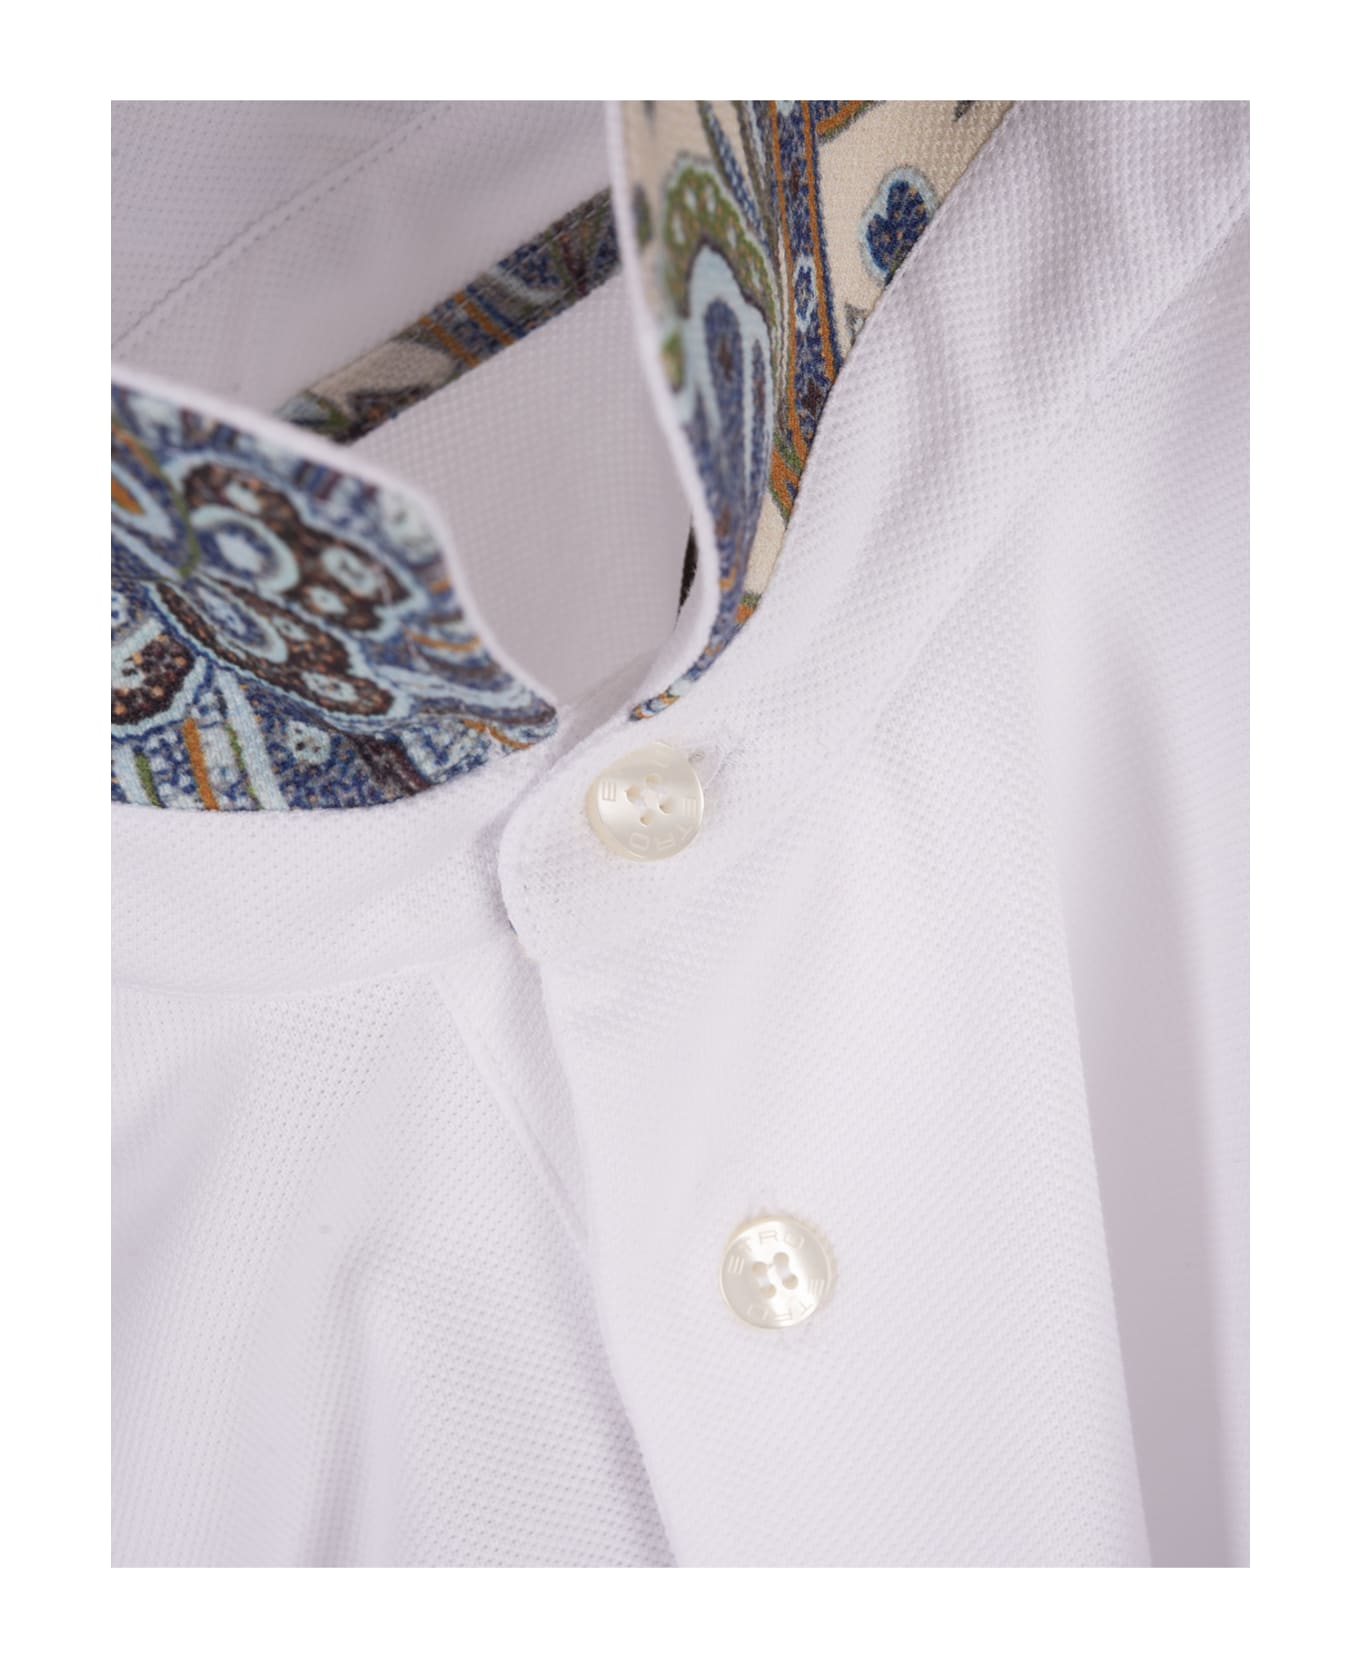 Etro White Polo Shirt With Logo And Paisley Undercollar - C ポロシャツ